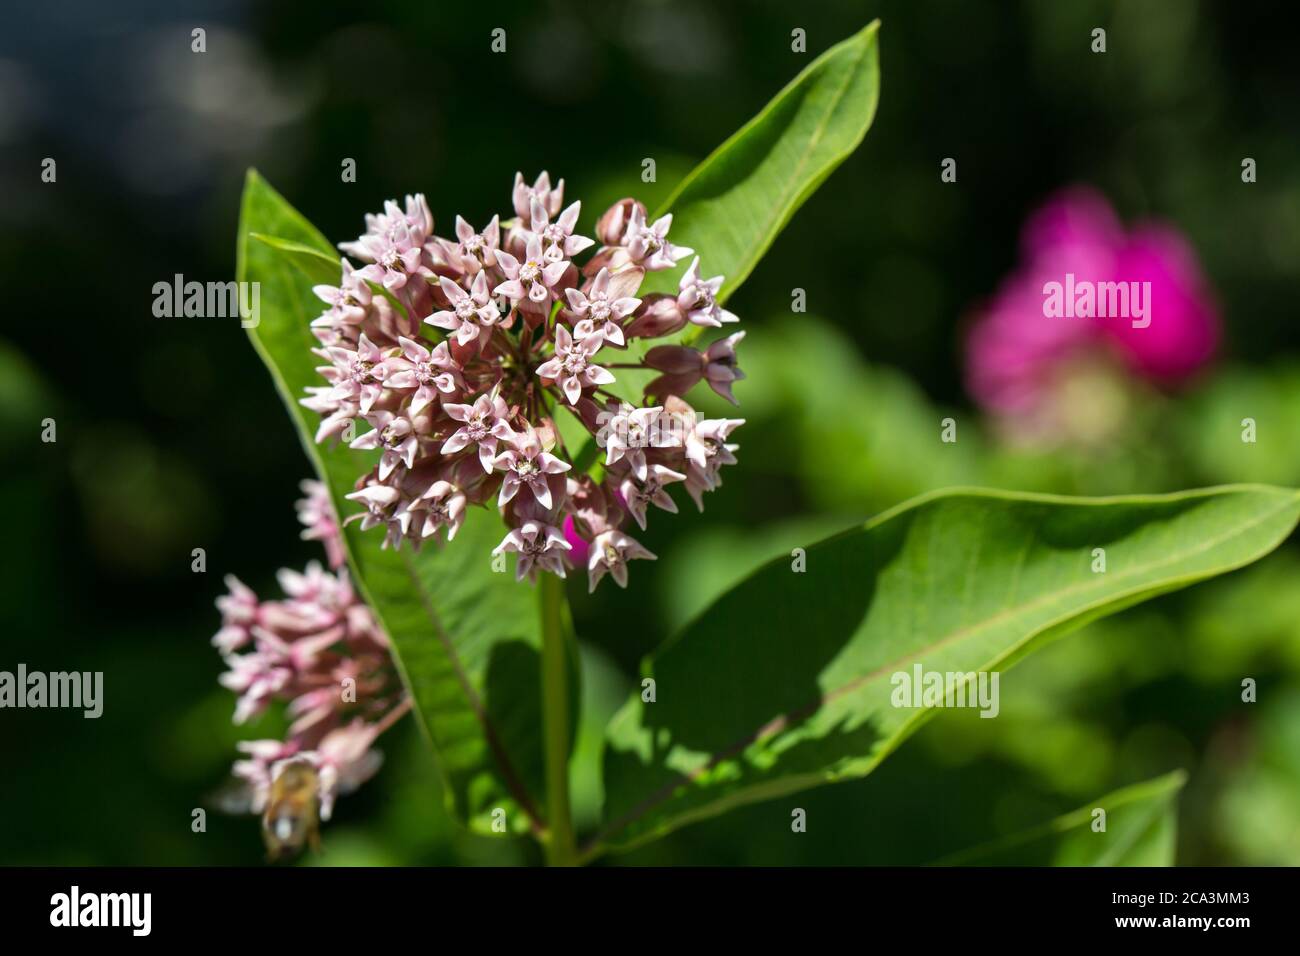 Close up of Asclepias syriaca. Common names include milkweed,butterfly flower and silkweed. Belonging to the Apocynaceae family. Stock Photo